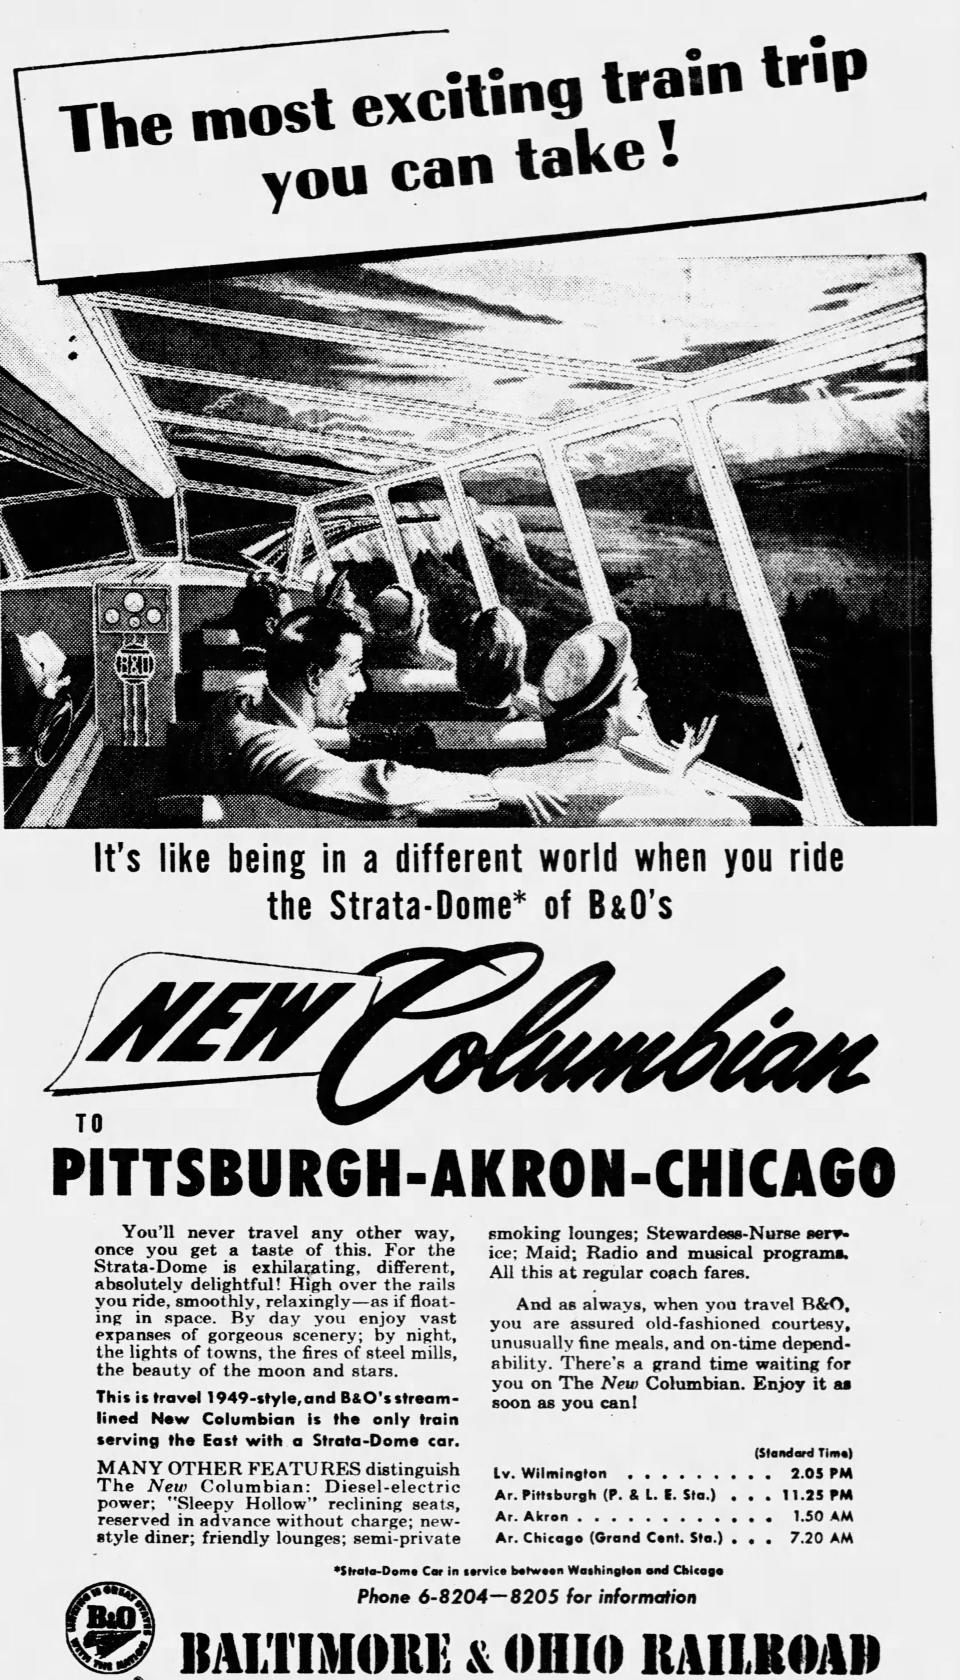 The Baltimore & Ohio Railroad advertises its New Columbian Strata-Dome train in 1949 with service in Akron.